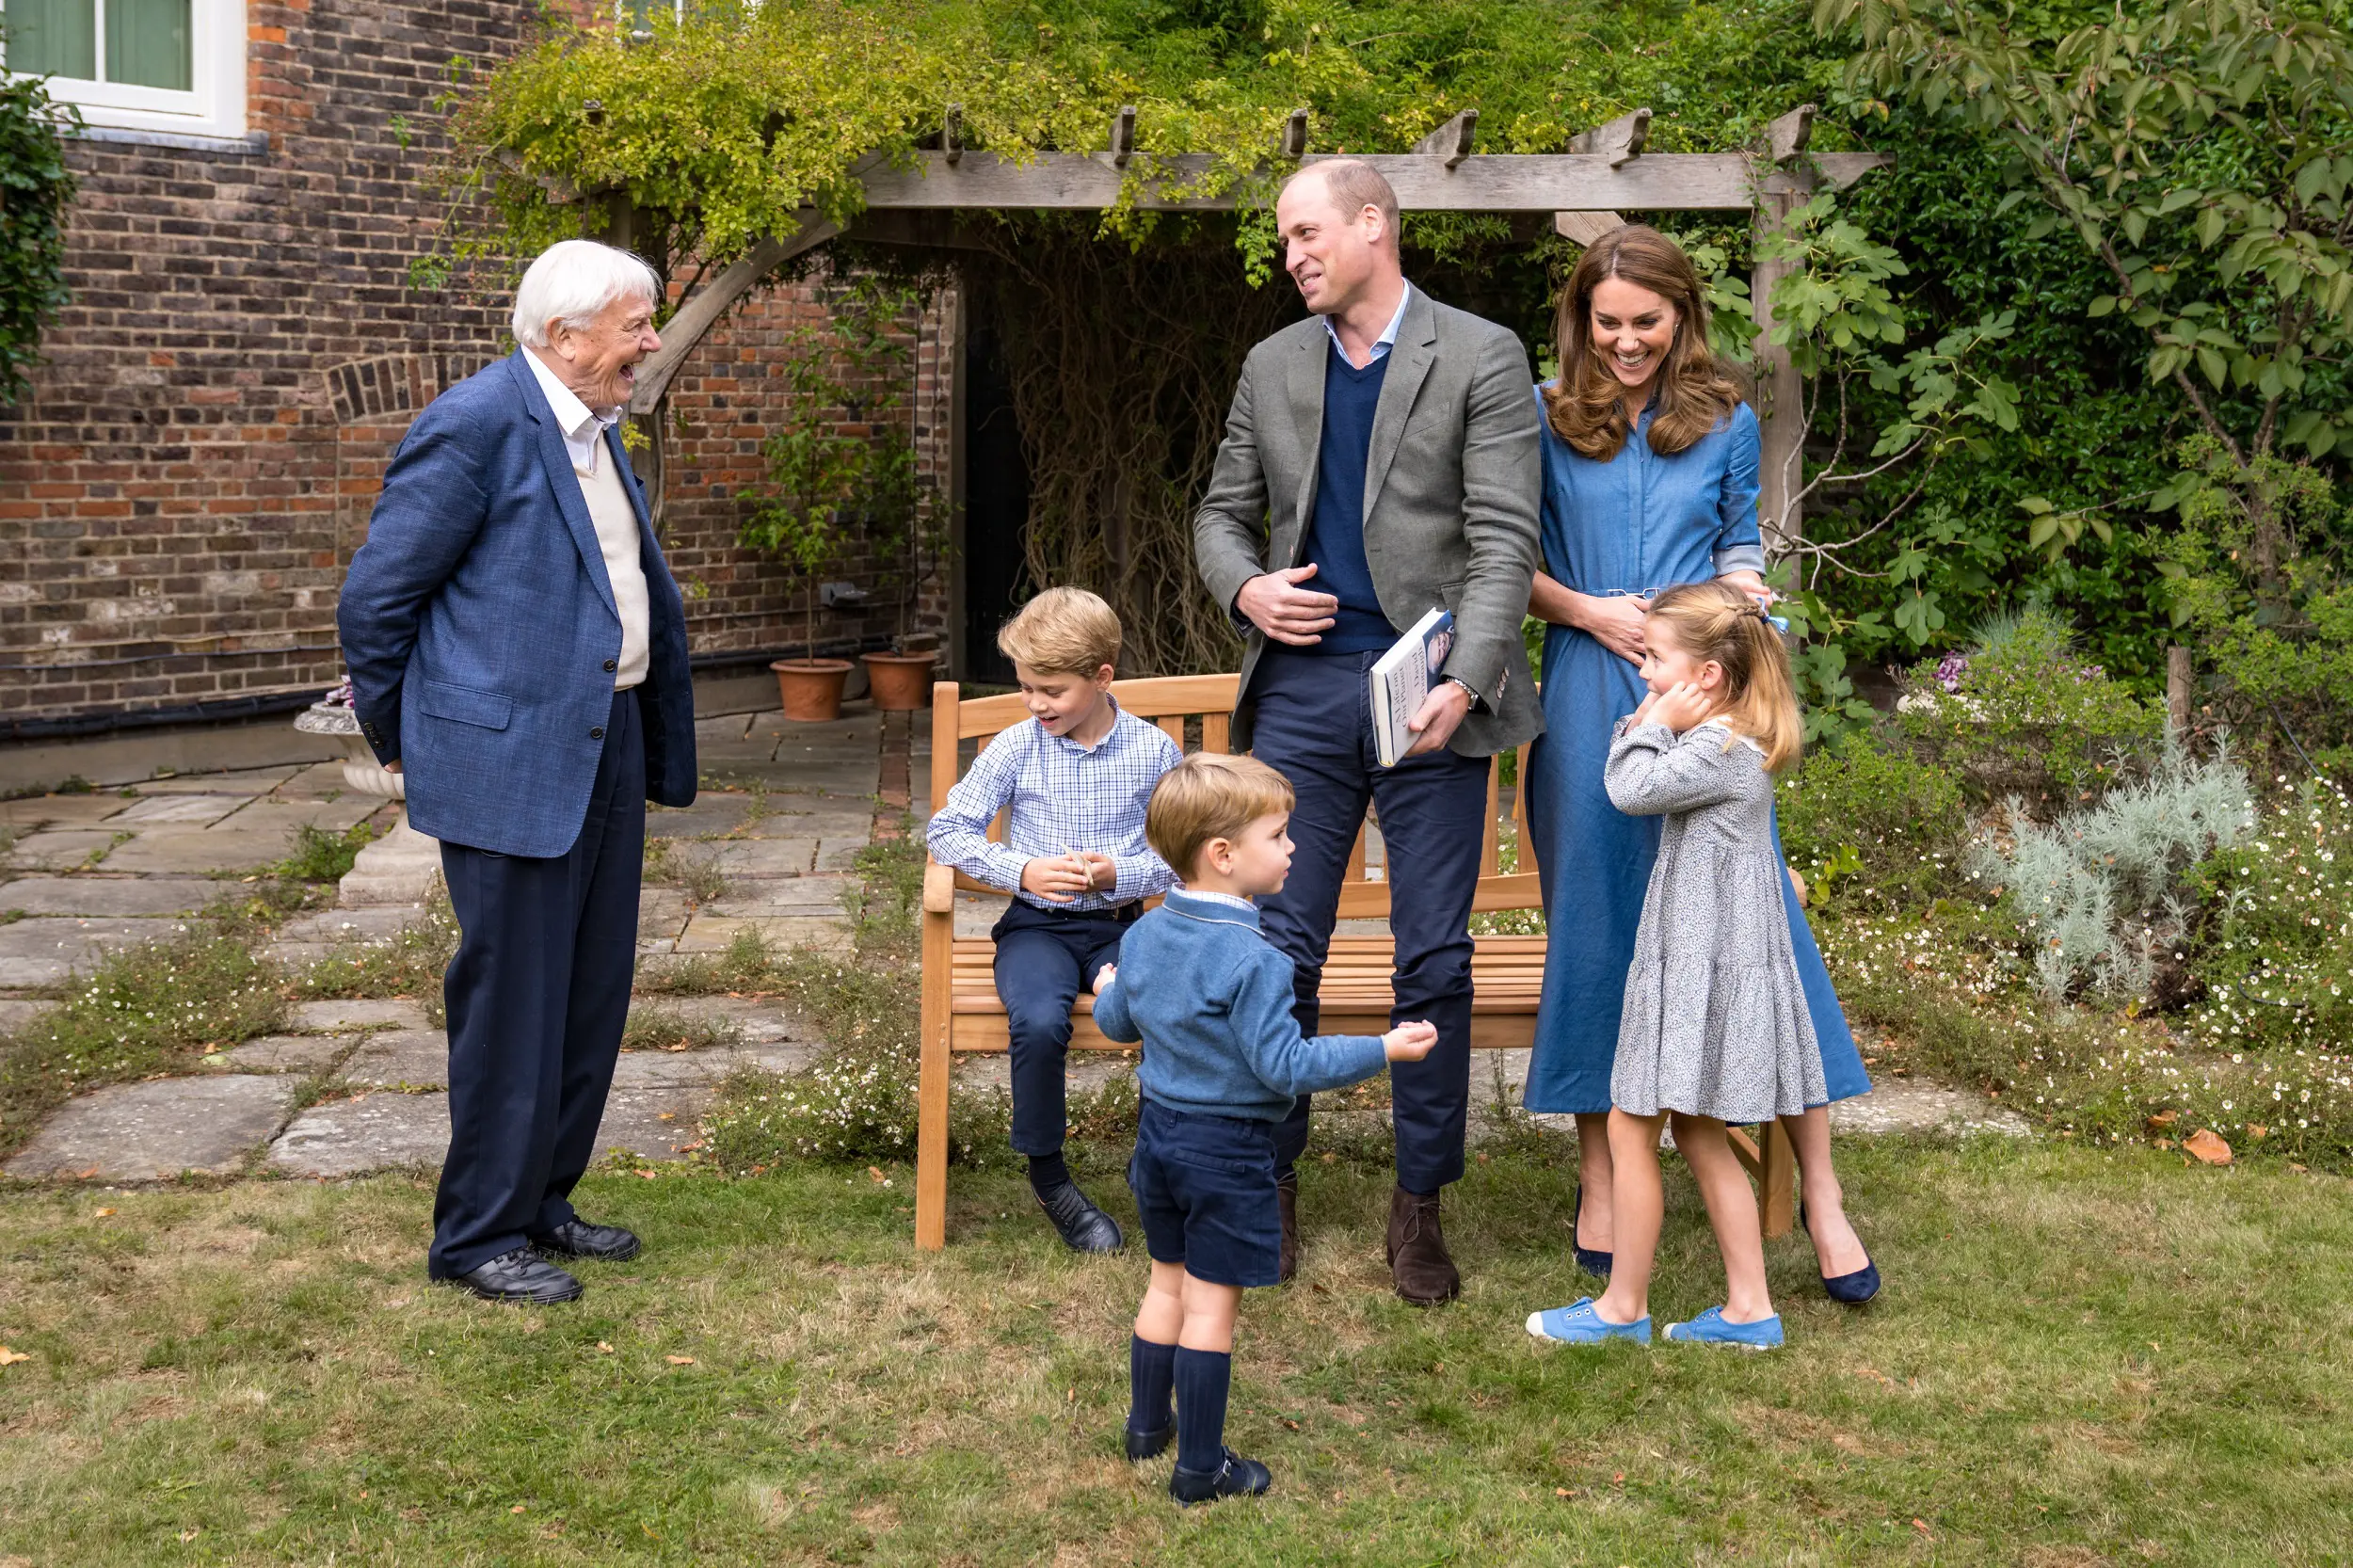 The Duke and Duchess of Cambridge introduced Prince George, Princess Charlotte and Prince Louis to Sir David Attenborough